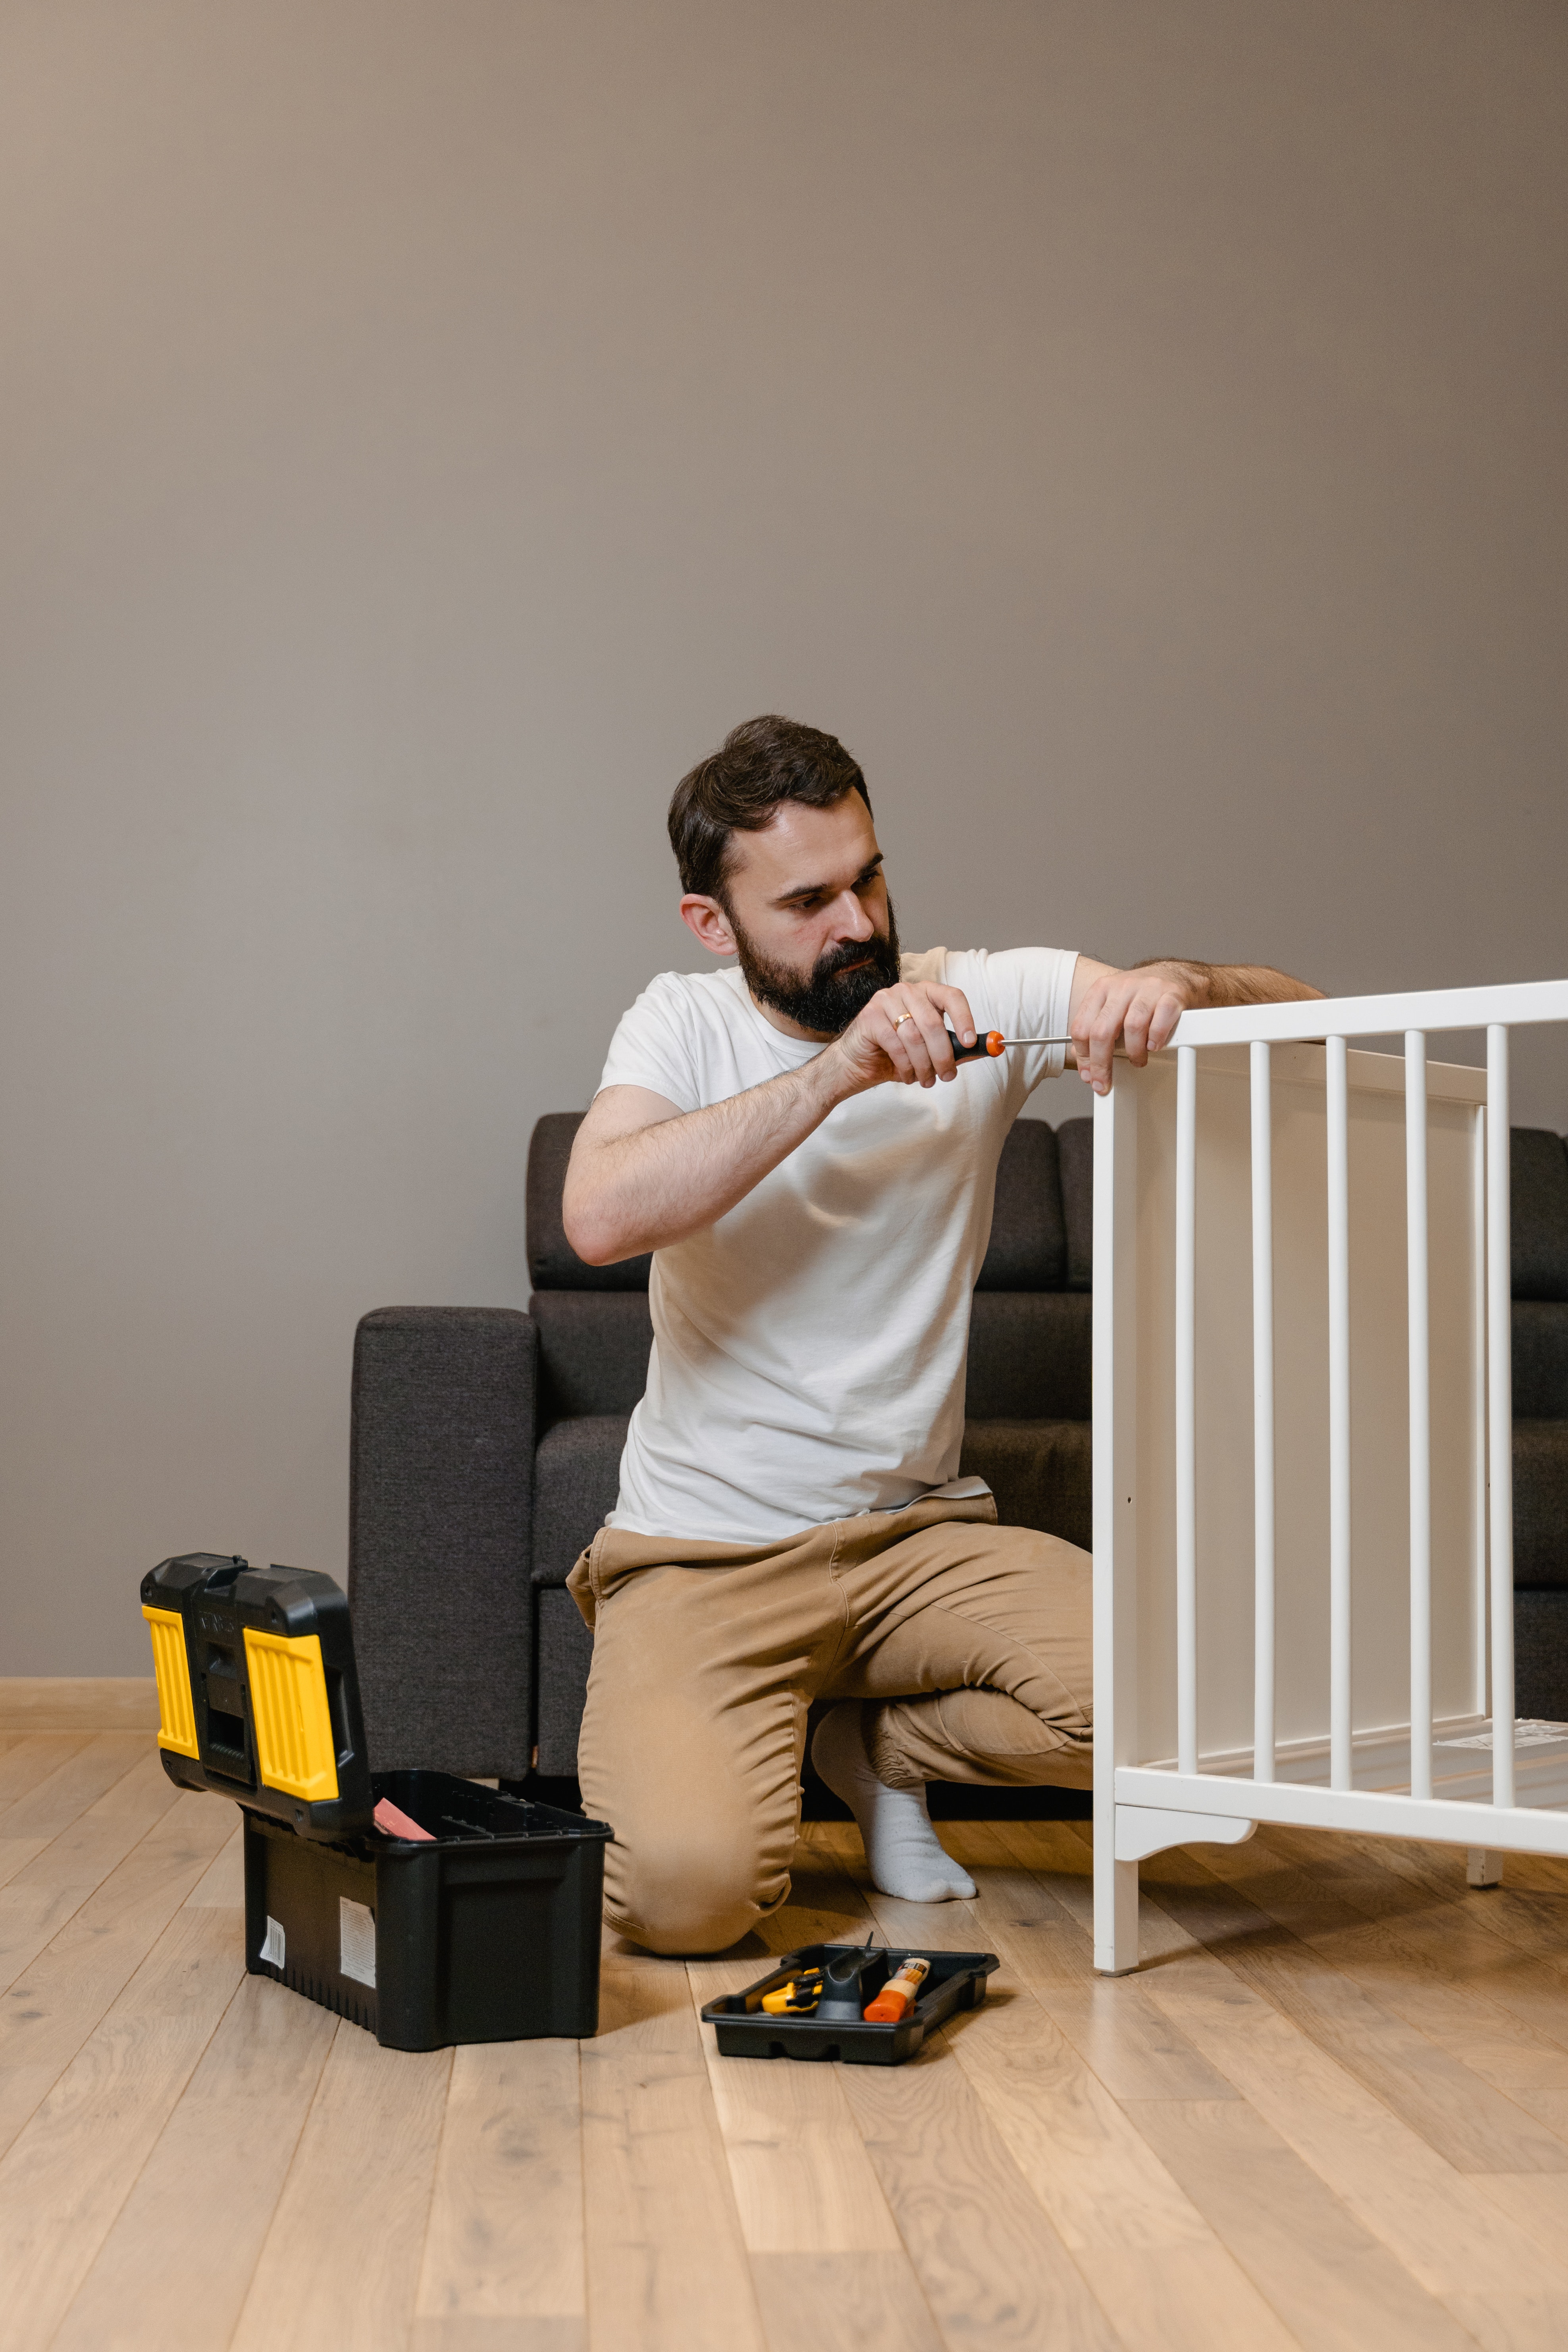 An employee from one of the Best Handyman Service Providers in the Hamilton Region, kneels beside his open toolbox while working to assemble a baby’s white coloured crib.